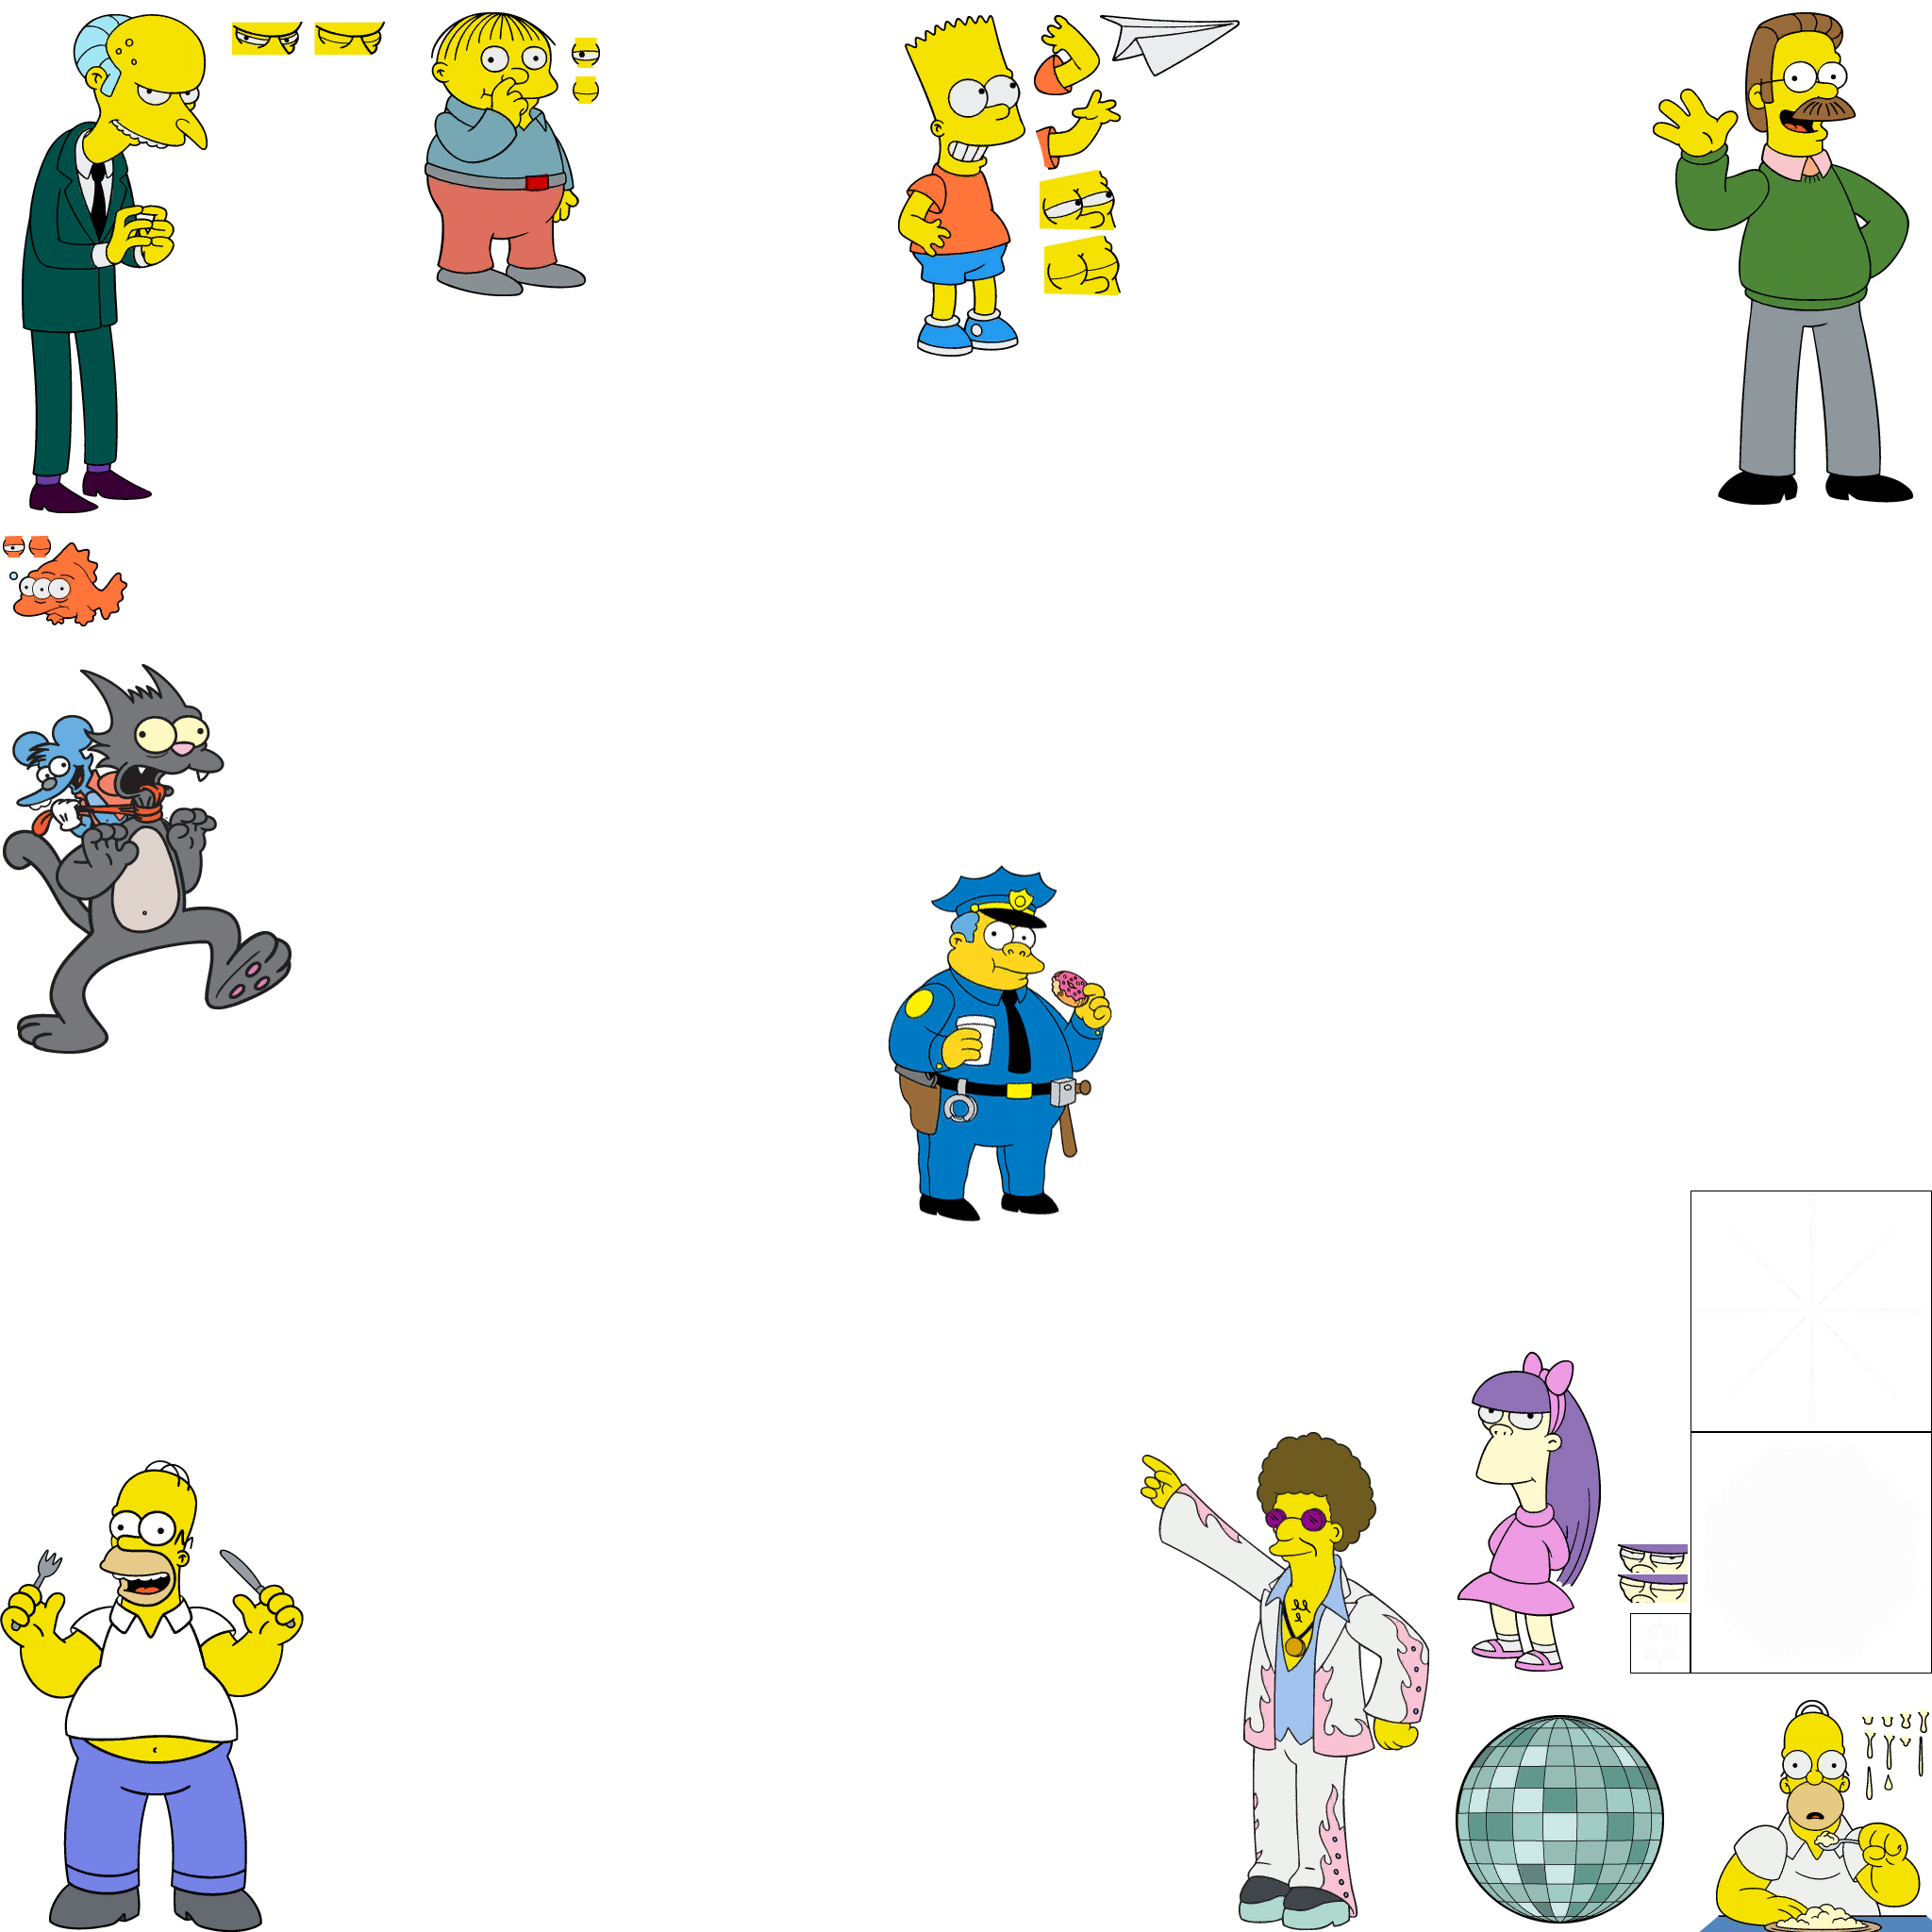 TheSimpsonsGame360-FIN_frontend.str-frontend.itxd-1_frontend_assets.png